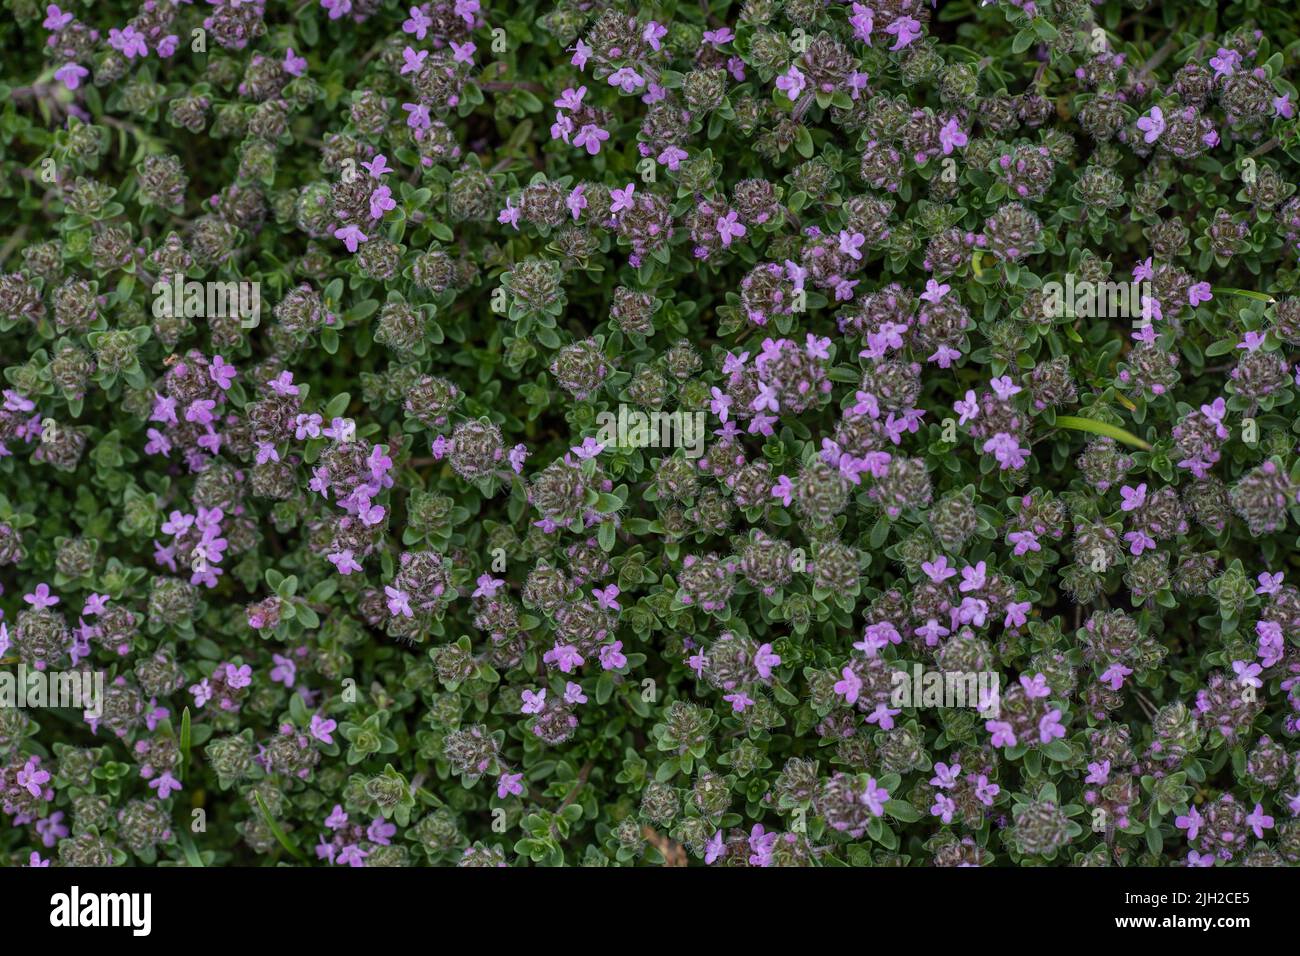 Closeup of wild thyme growing on the ground. Stock Photo